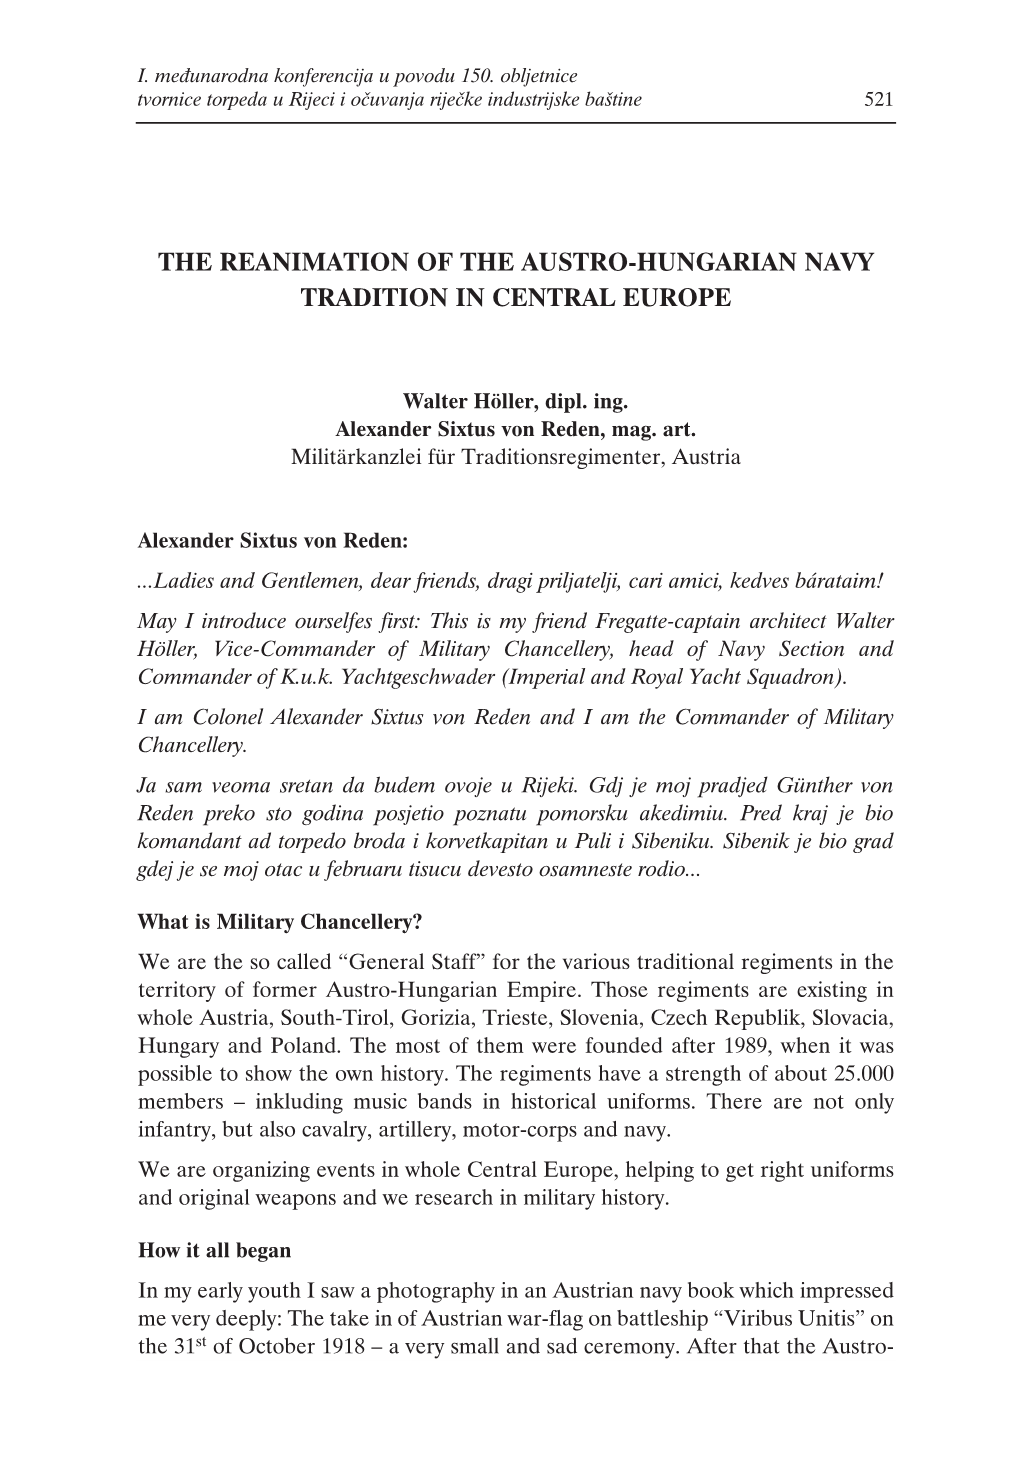 The Reanimation of the Austro-Hungarian Navy Tradition in Central Europe